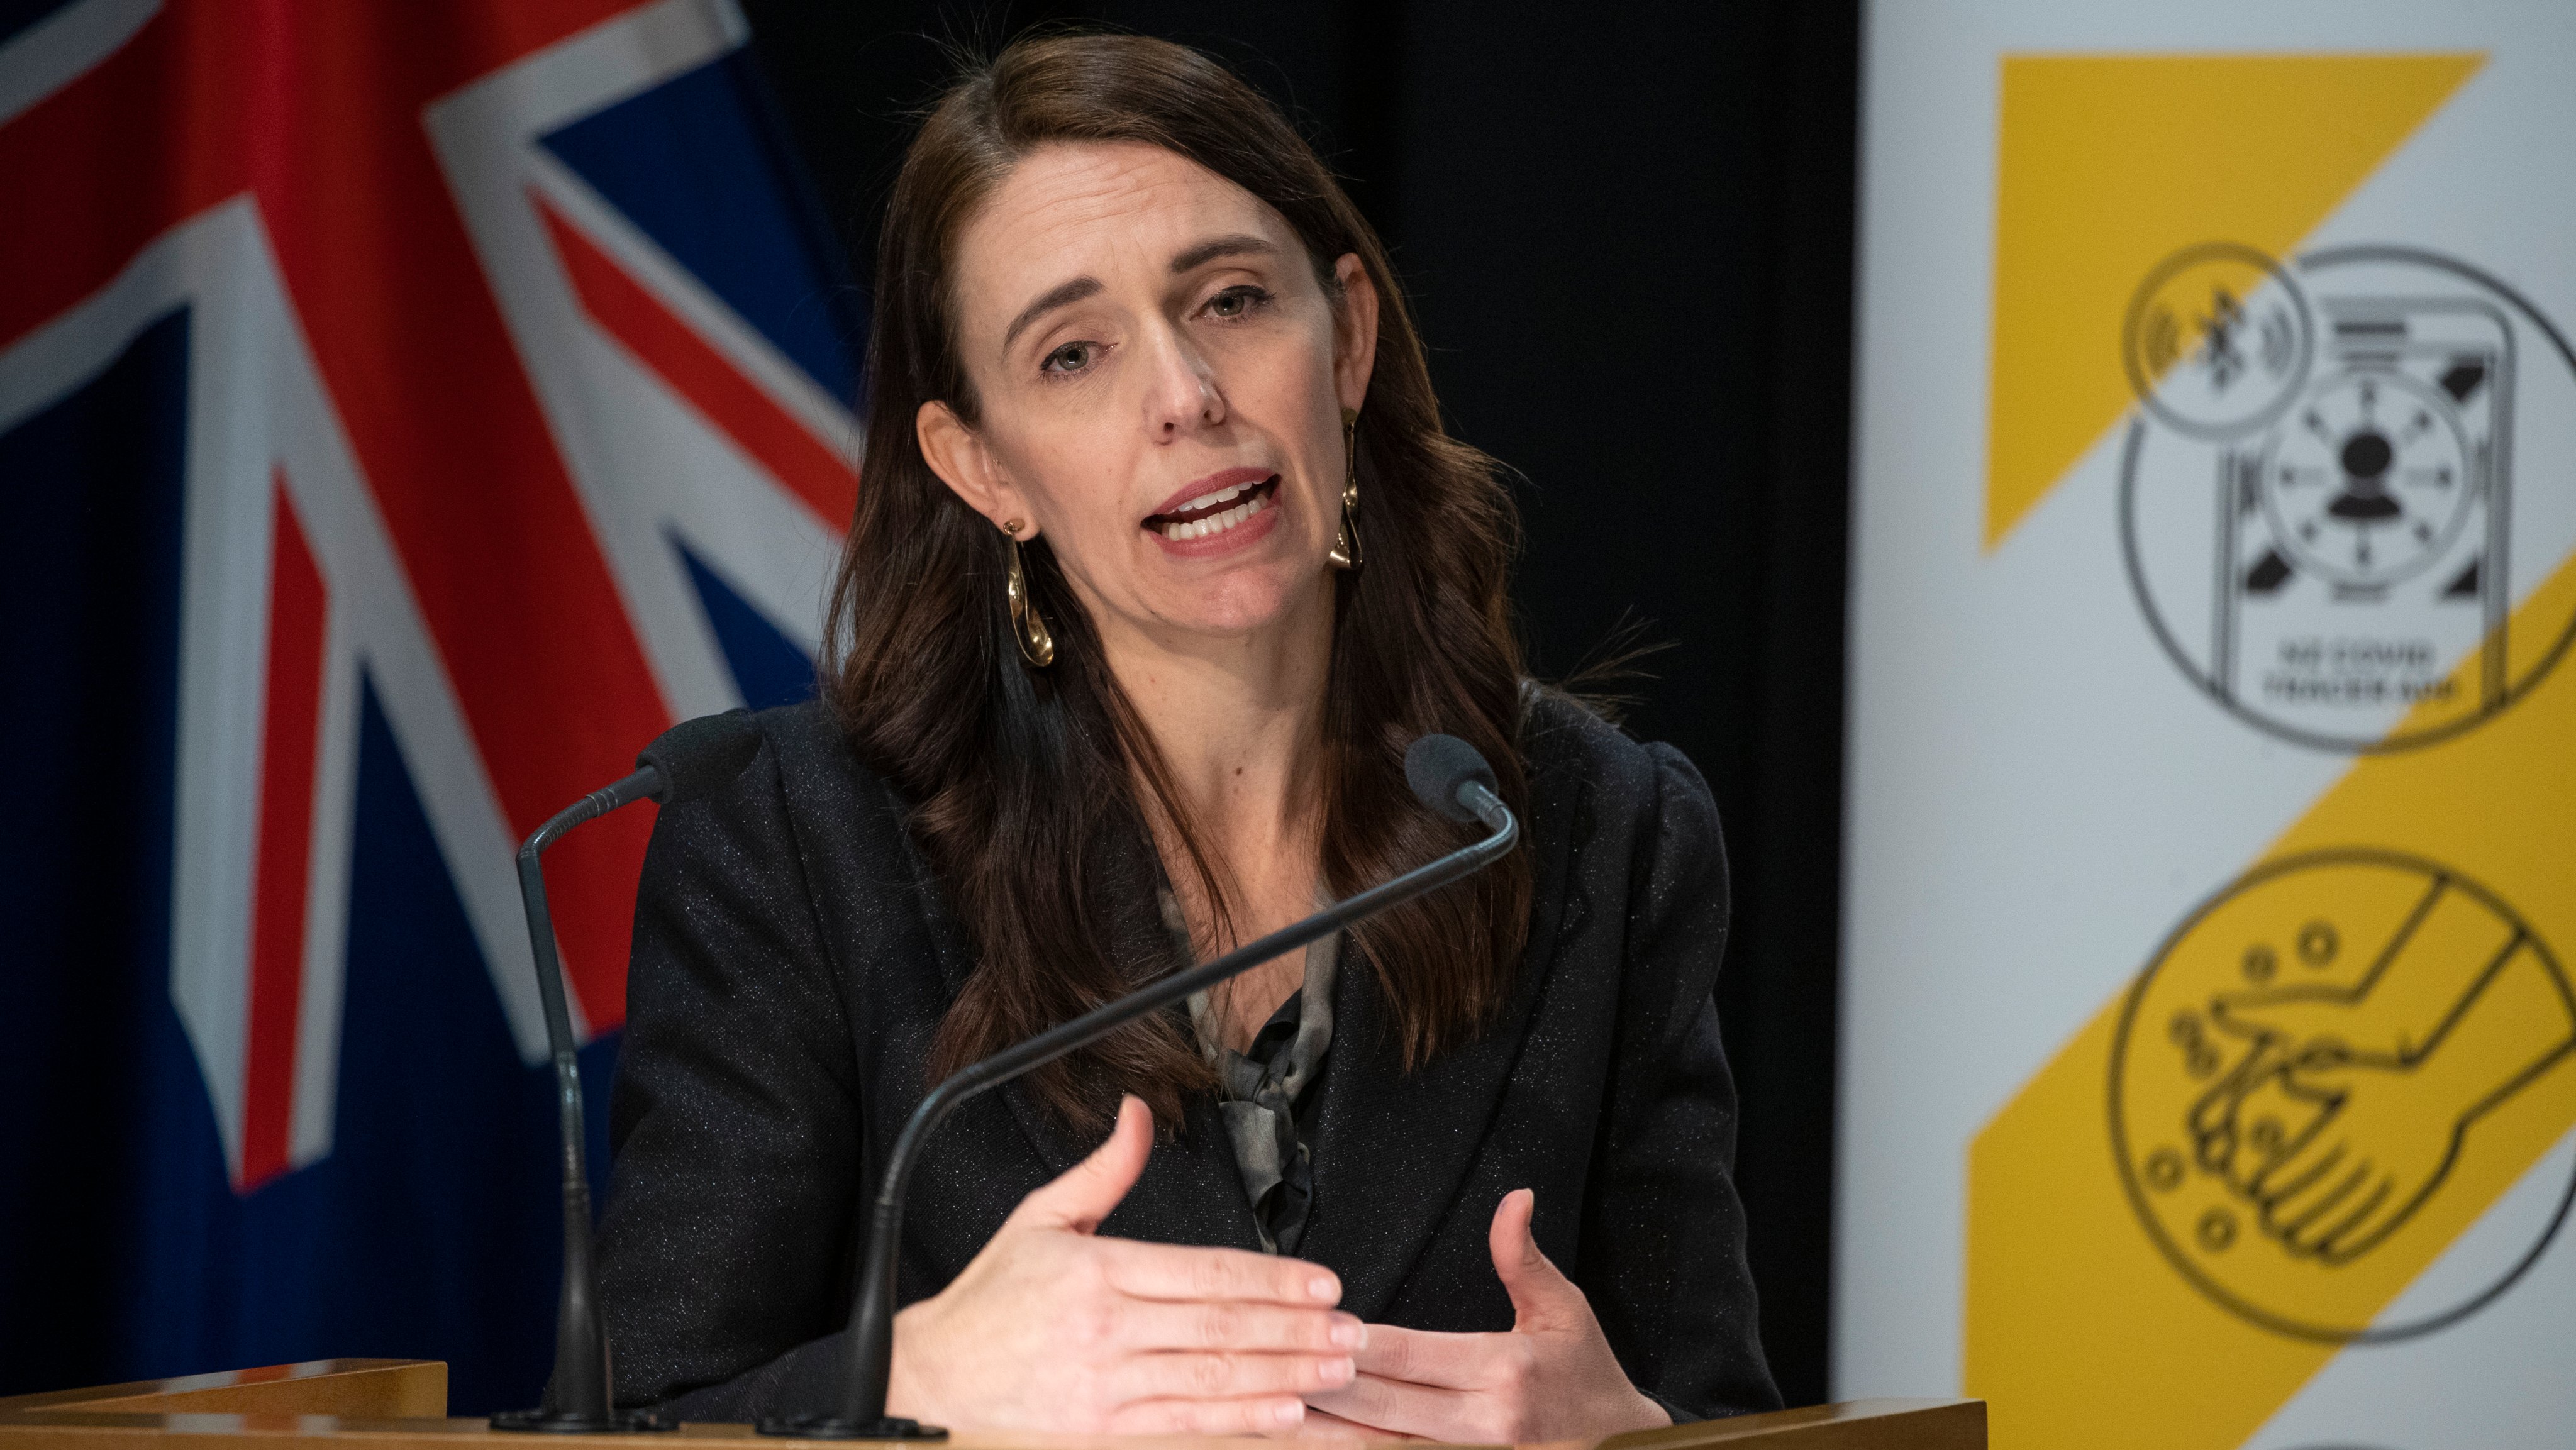 Prime Minister Jacinda Ardern Gives COVID-19 Update As Lockdown Restrictions Are Reimposed Across New Zealand